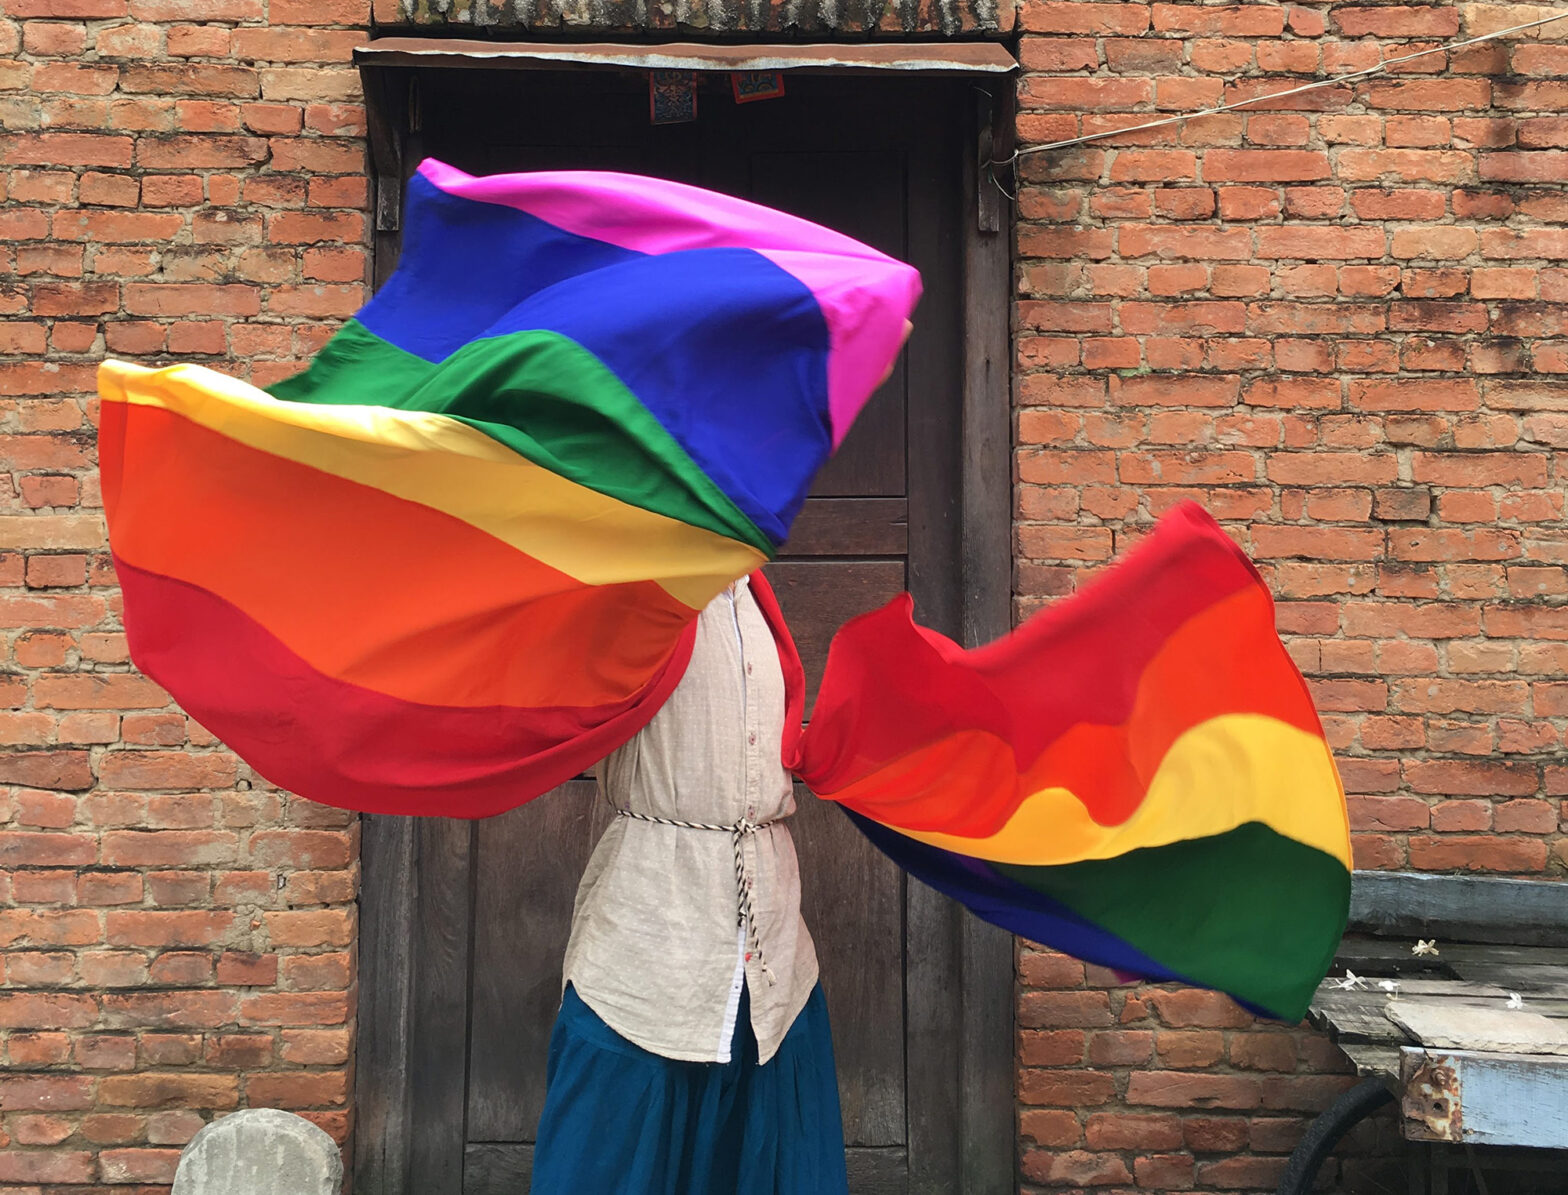 lgbtiq+-people-feel-counted-through-first-gender-sensitive-question-in-nepal-census